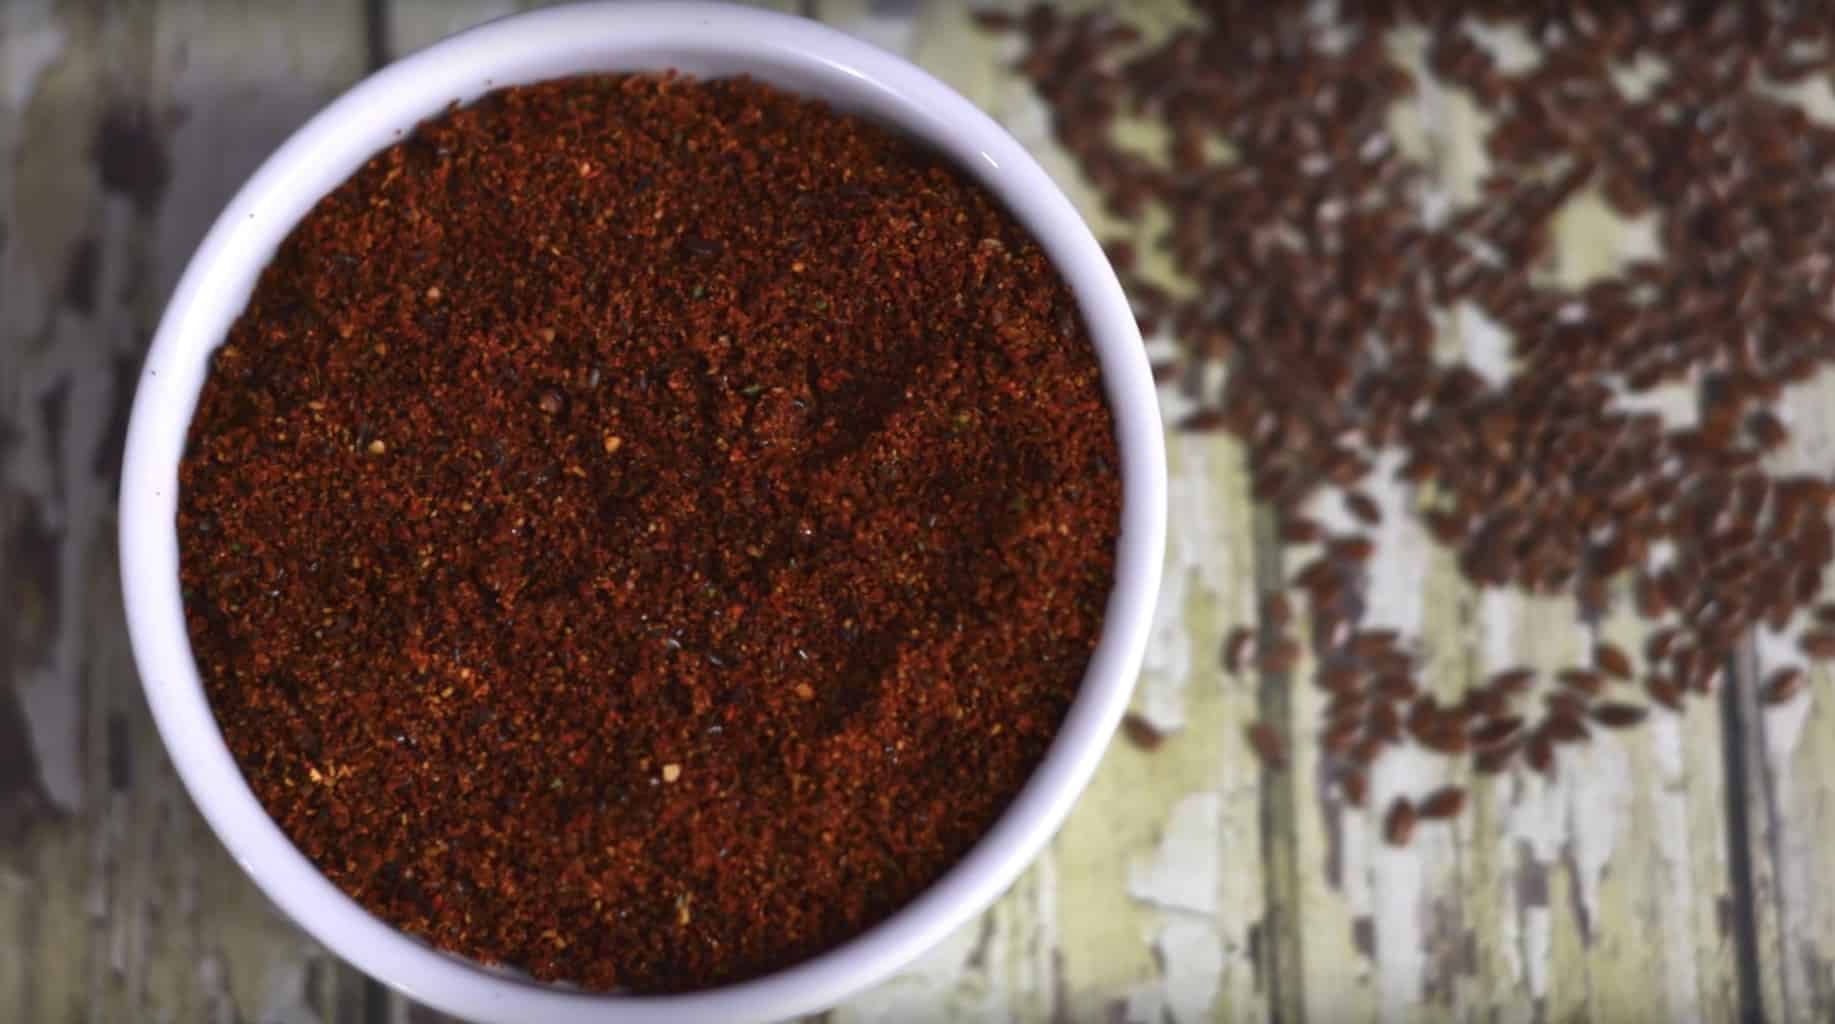 Flax Seeds Chutney Powder also known as Agase Chutney Pudi is a super healthy and delicious North Karnataka Style chutney powder prepared using flax seeds, red chili powder, curry leaves, garlic, tamarind ,jaggery and salt.